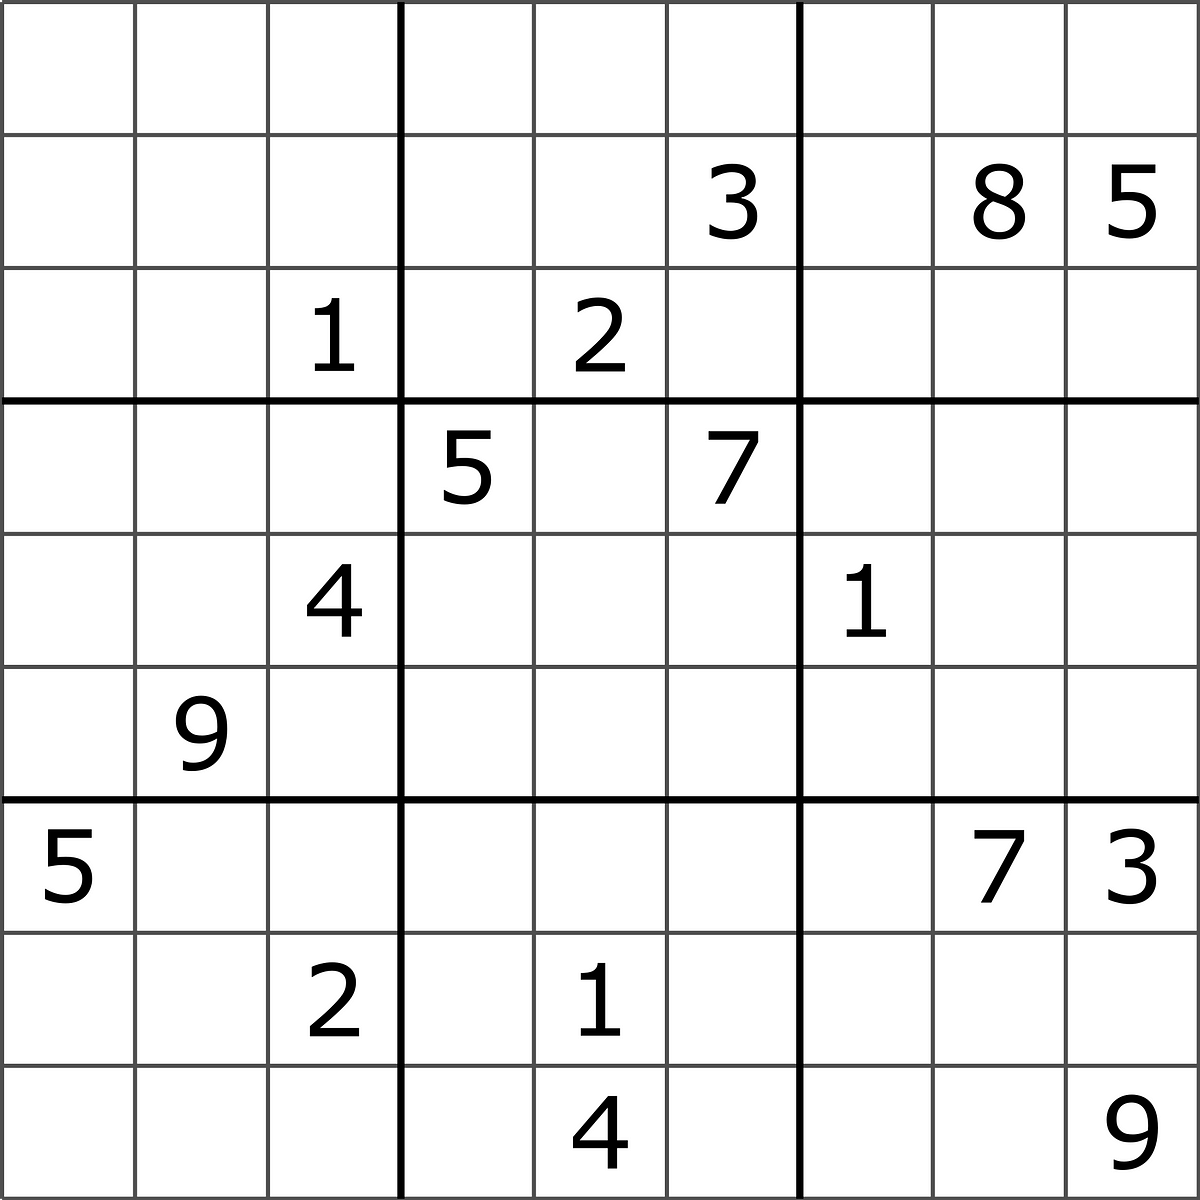 solving sudoku using a simple search algorithm by george seif medium